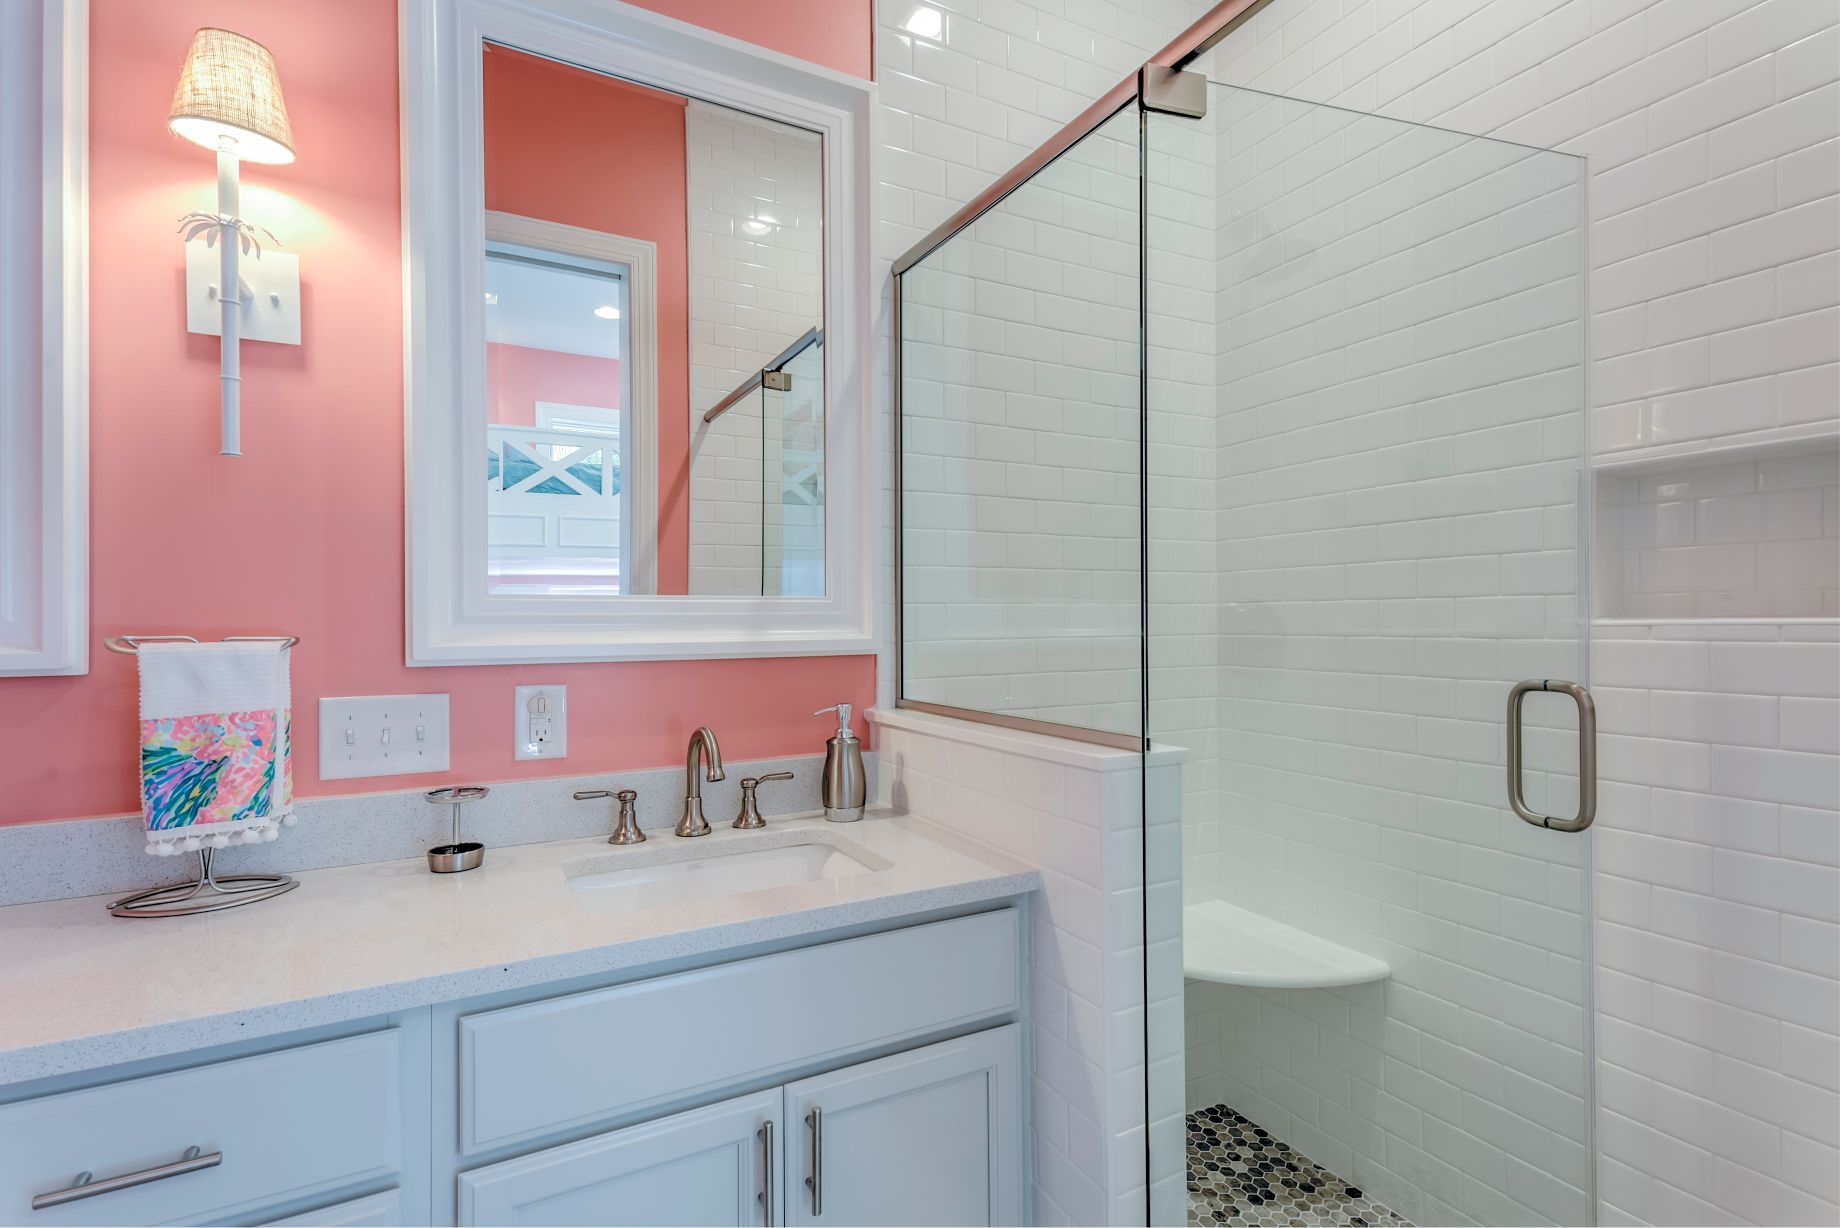 Bathroom in Juniper Court, Ocean Pines MD with Coral Wall Paint and Square Mirror with White Frame